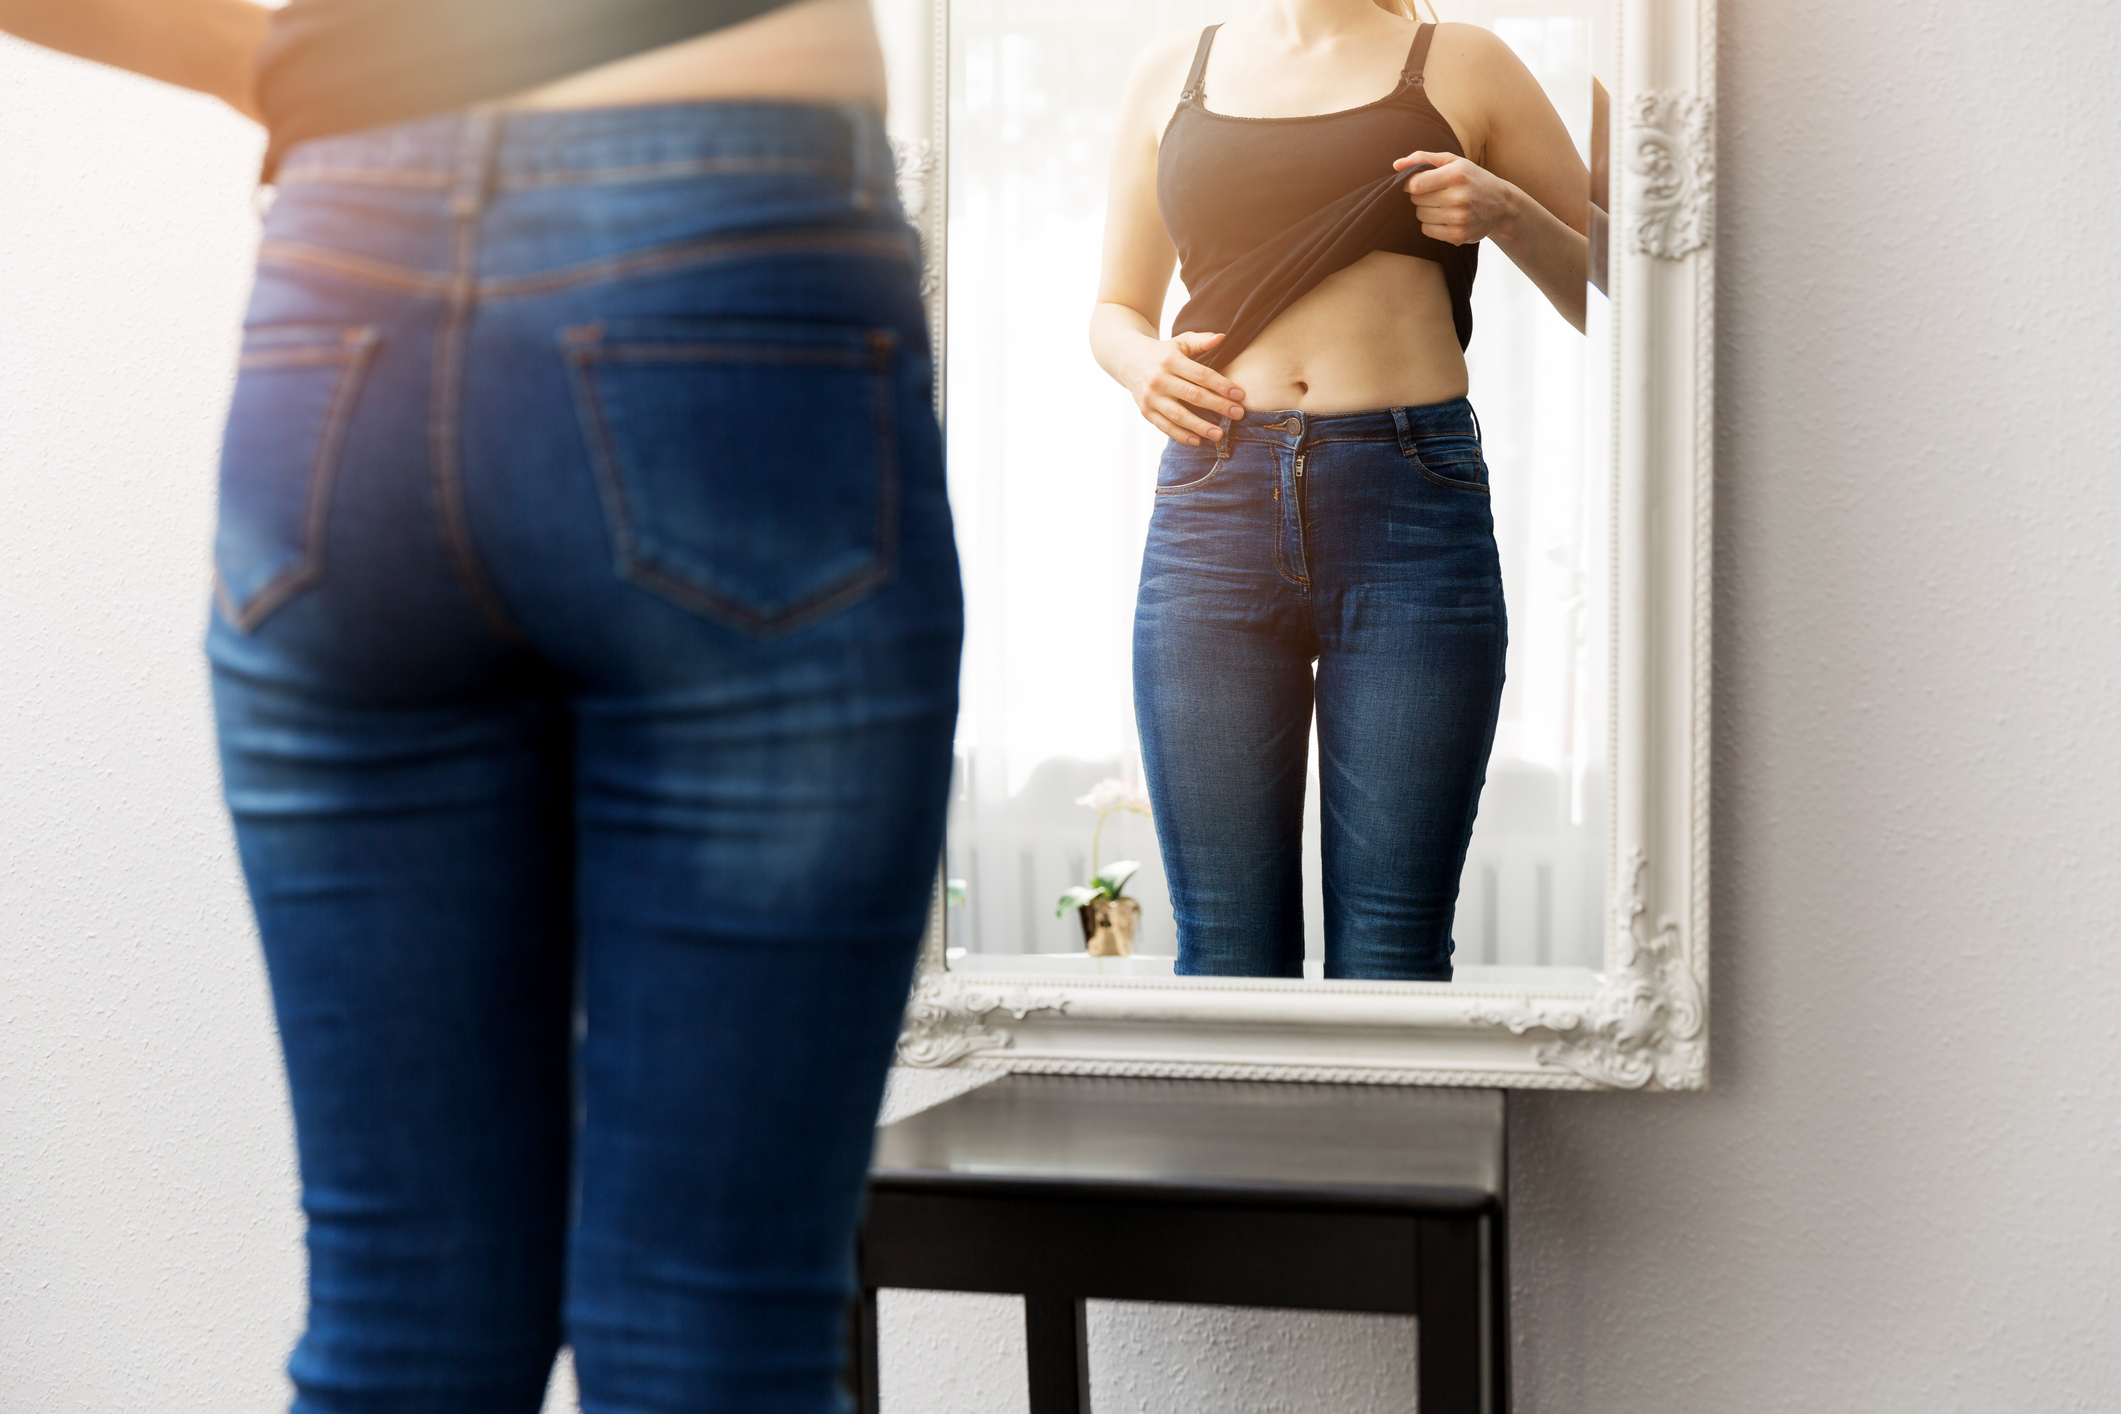 My Child is Struggling with Their Body Image -  How Can I Help Them?